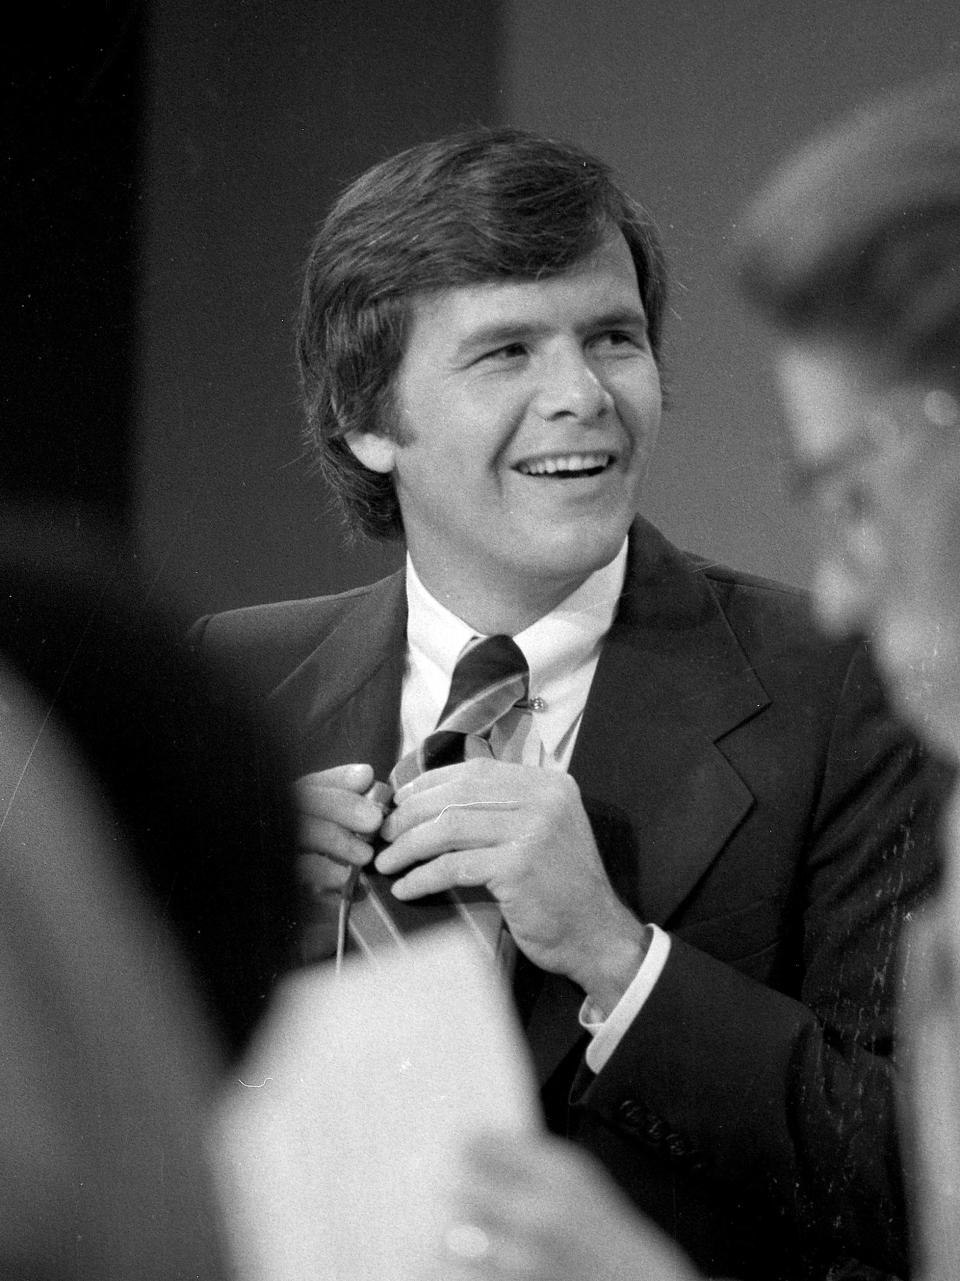 FILE - Tom Brokaw appears on his first day as host of NBC's "Today" show in New York on Aug. 30, 1976. Brokaw says he is retiring from NBC News after working at the network for 55 years. The author of "The Greatest Generation" is now 80 years old and his television appearances have been limited in recent years as he fought cancer. He says he will continue writing books and articles. (AP Photo, File)